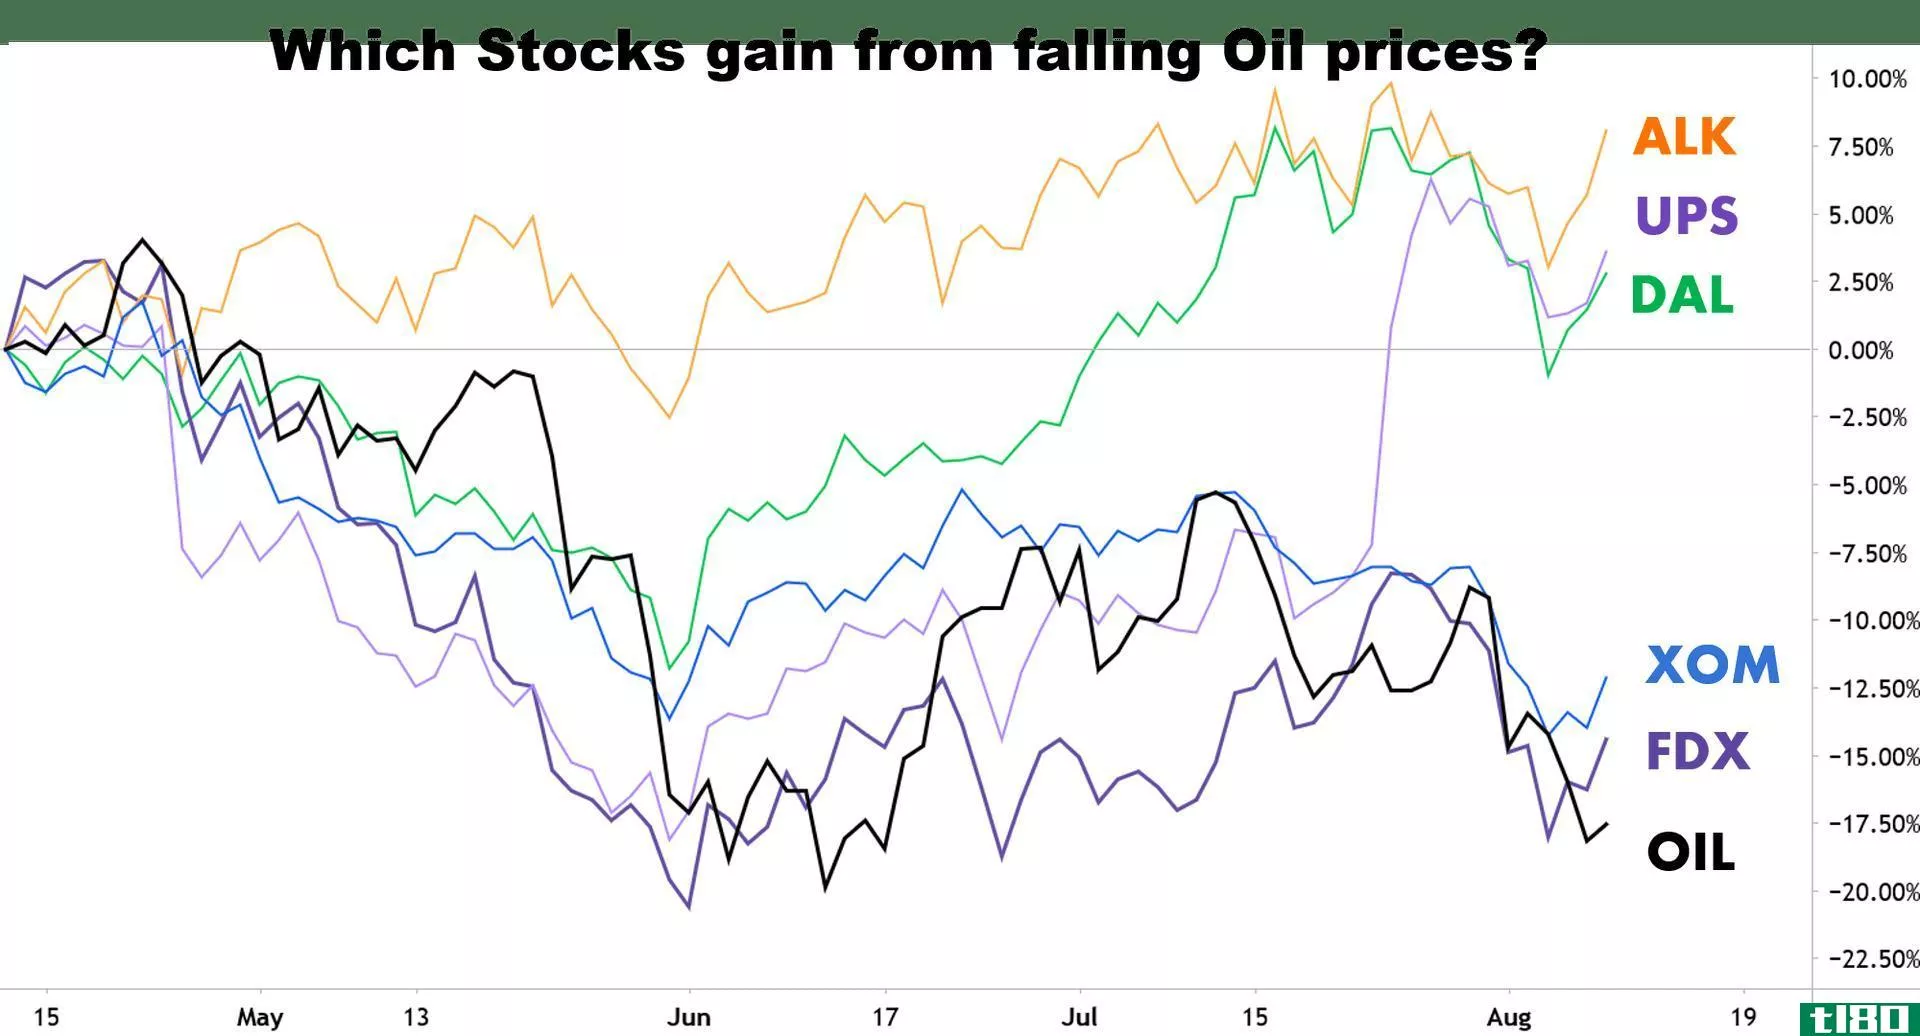 Chart showing stocks that gain and decline from falling oil prices